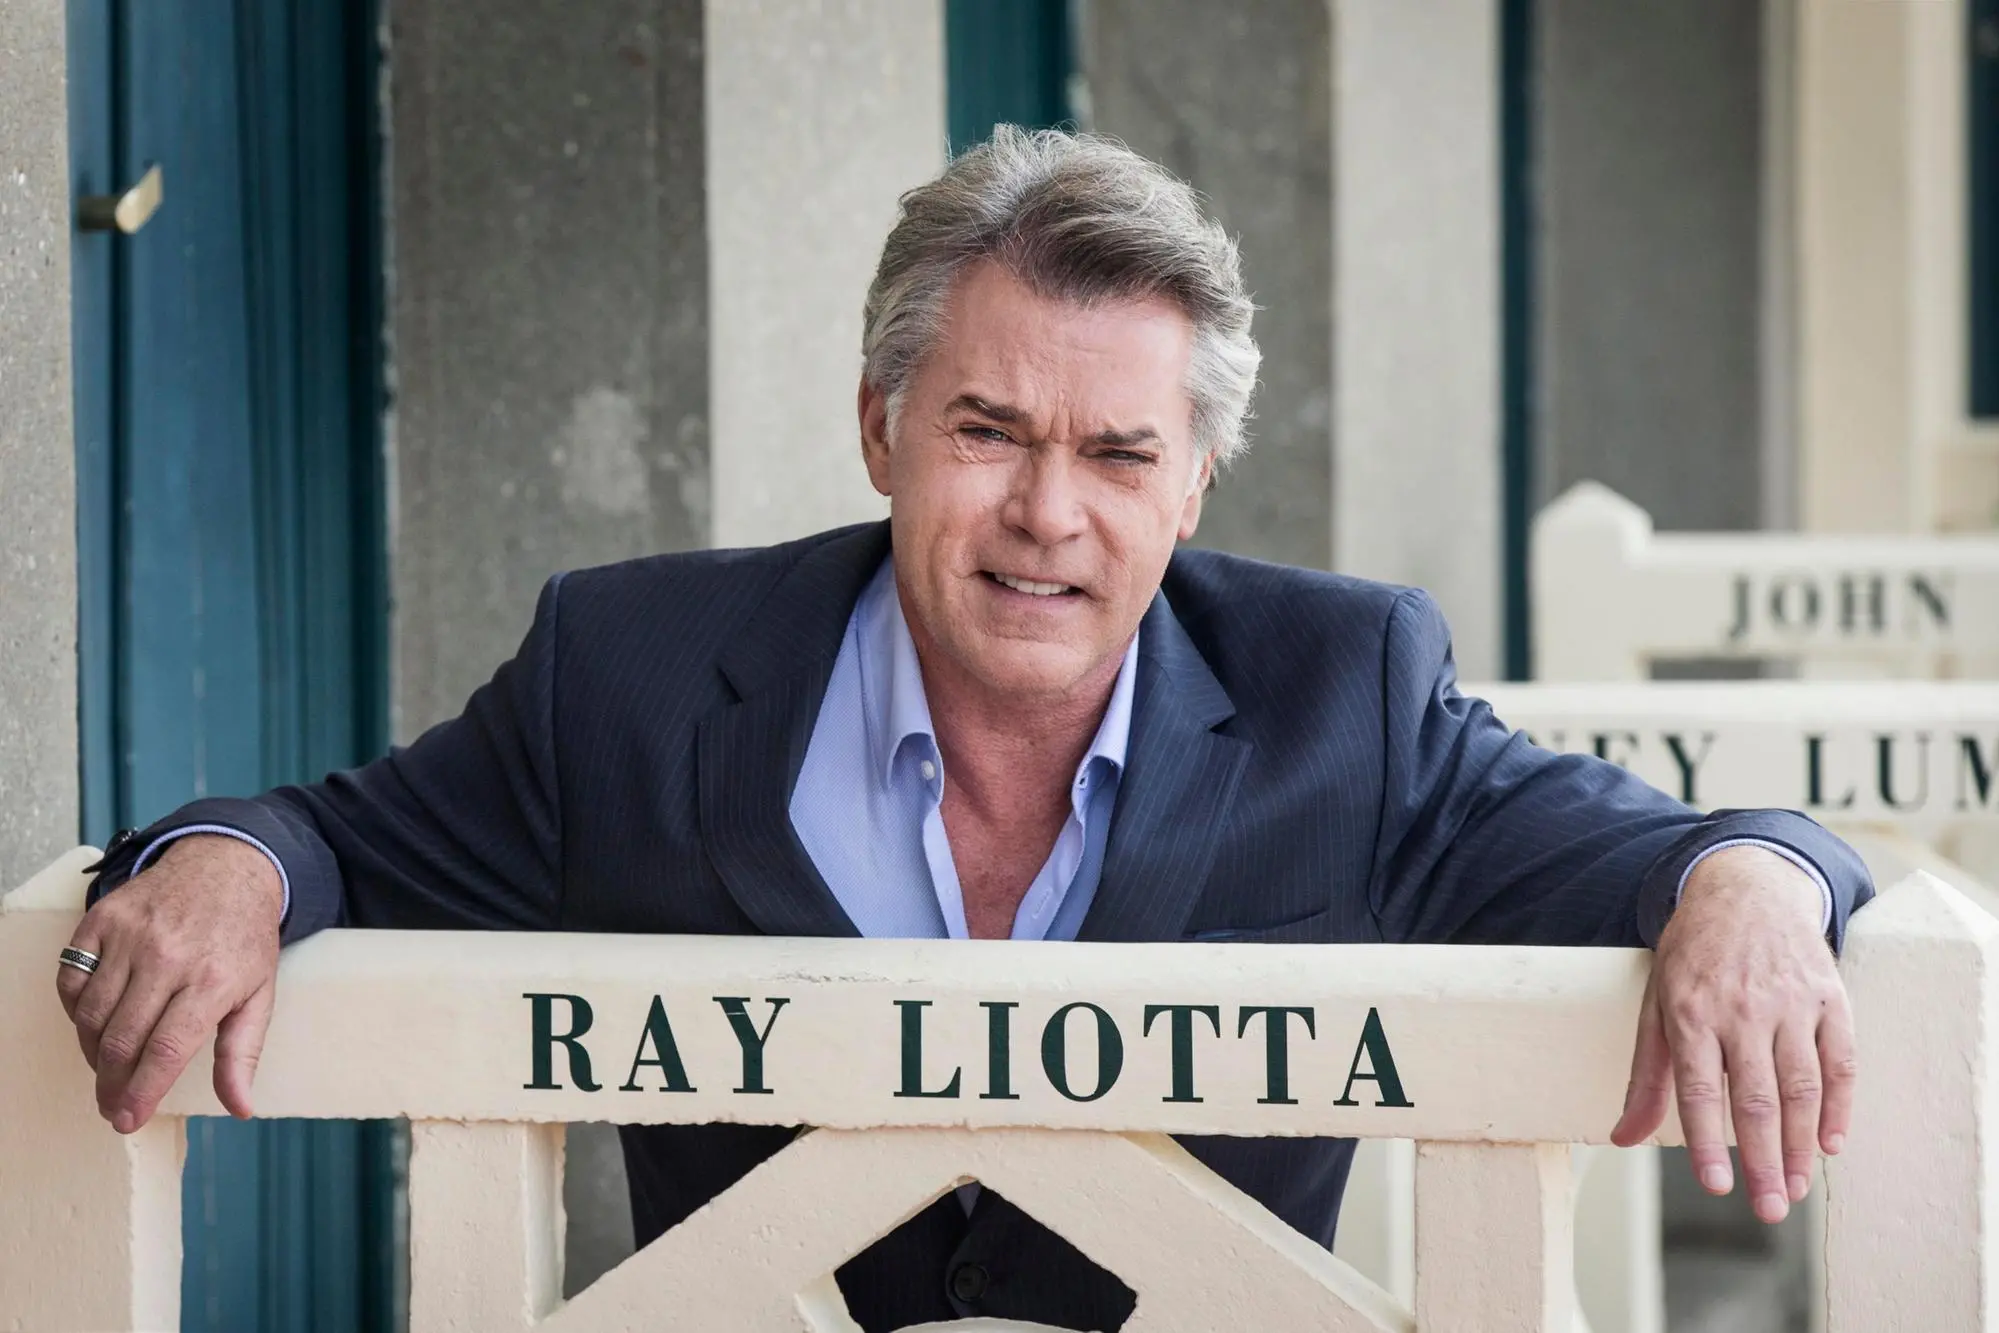 epa09977856 (FILE) - US actor Ray Liotta poses for the photographers after he unveiled his cabin sign as a tribute for his career along the Promenade des Planches during the 40th annual Deauville American Film Festival, in Deauville, France, 09 September 2014 (Reissued 26 May 2022). US Actor Ray Liotta died at the age of 67 as confirmed by his representative. EPA/ETIENNE LAURENT *** Local Caption *** 51560982